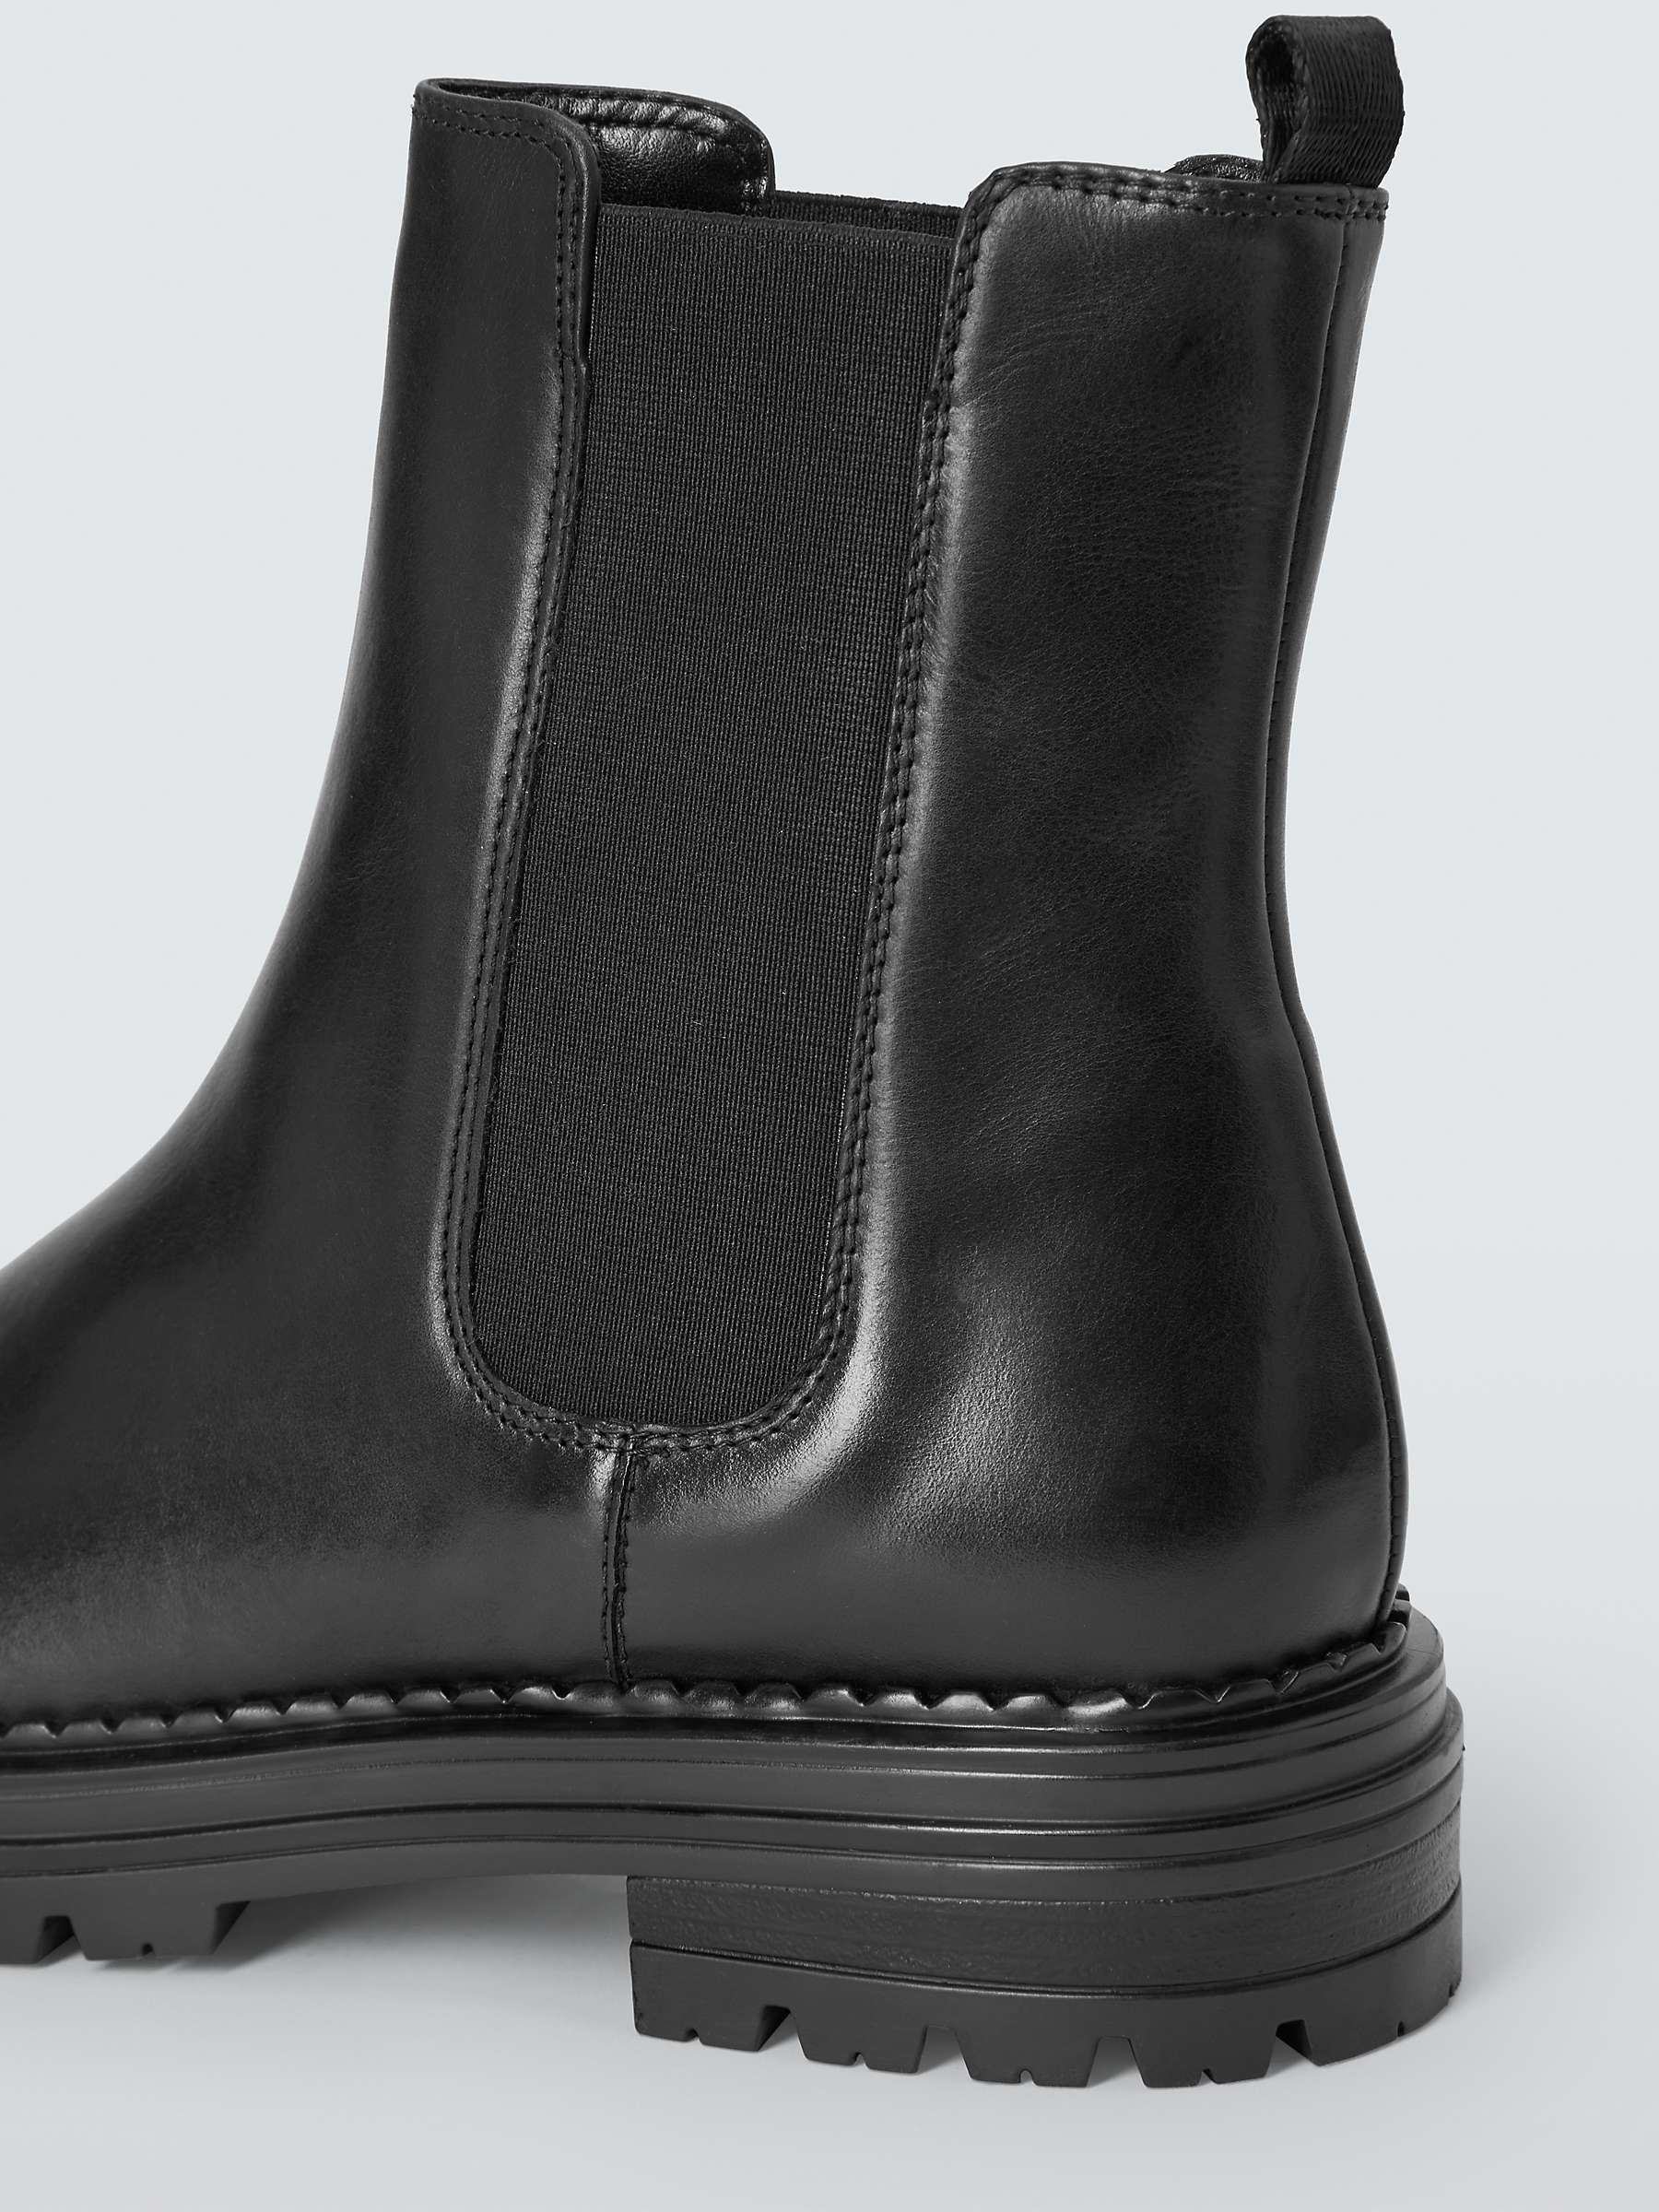 Buy John Lewis Poppie Leather Cleated Sole High Cut Chelsea Boots, Black Online at johnlewis.com